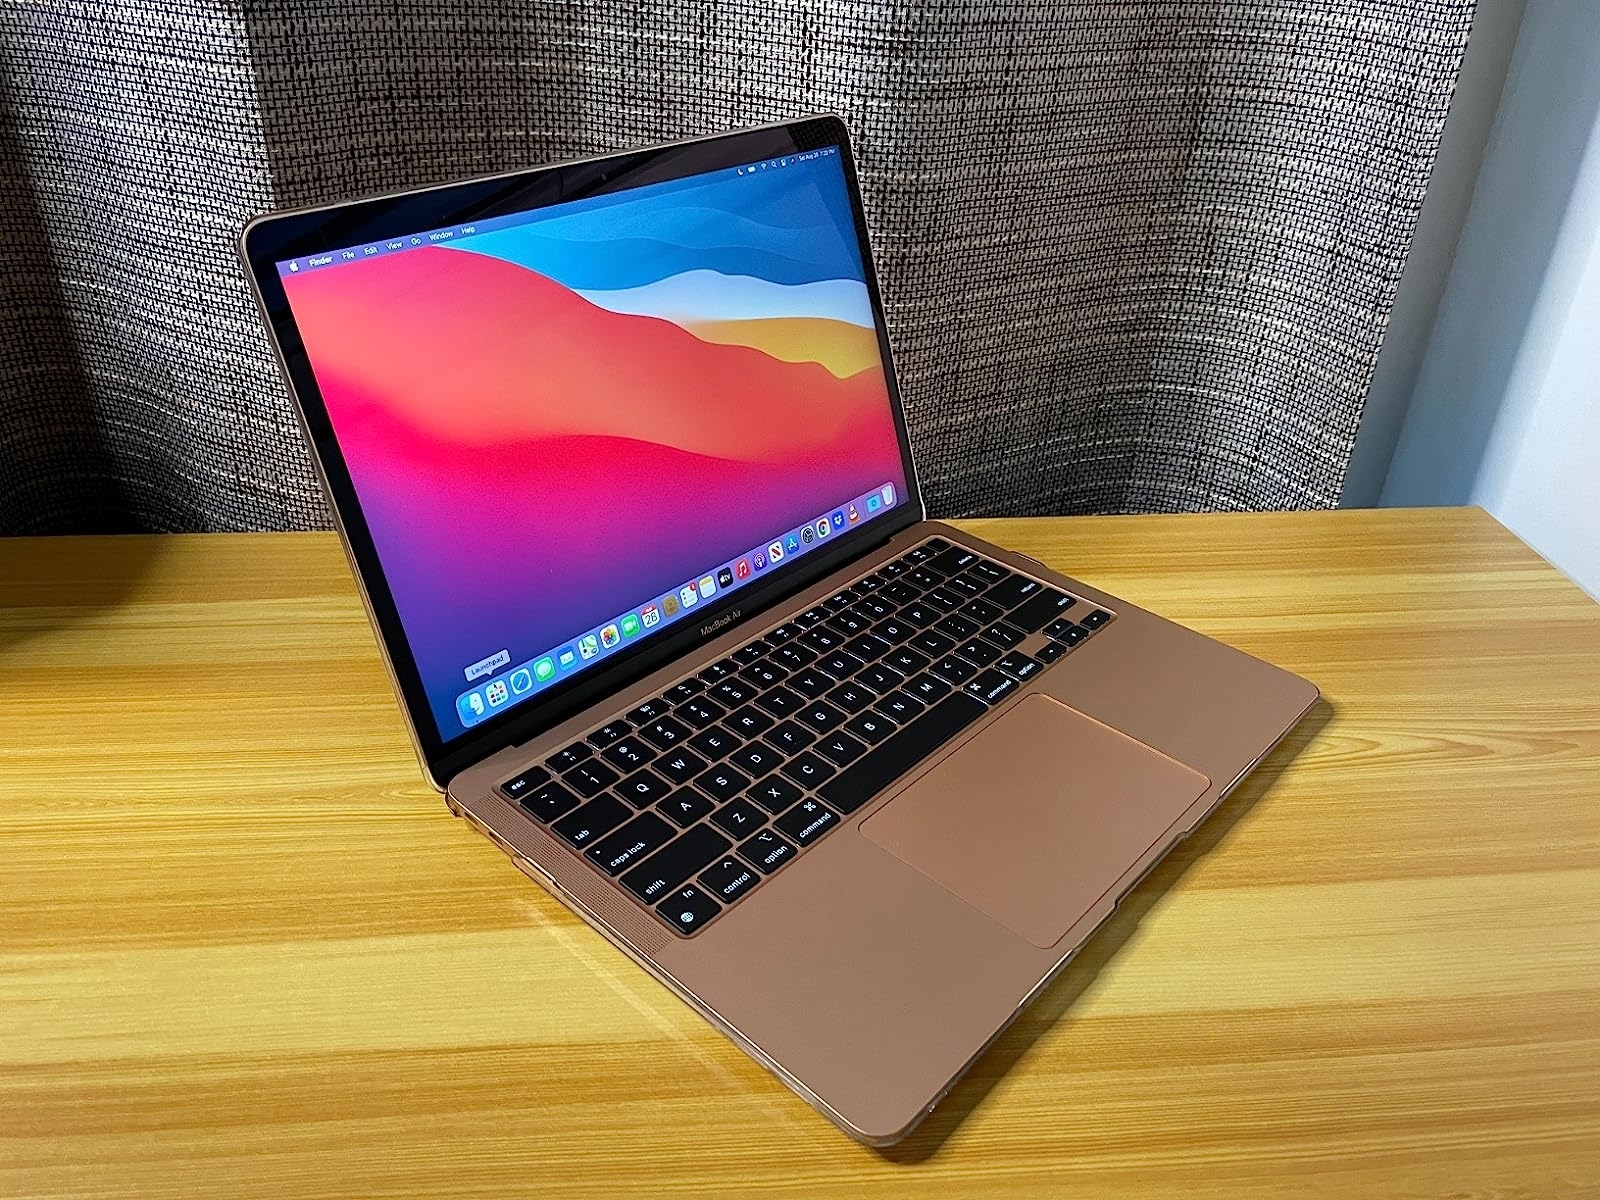 reviewer photo of their gold-colored laptop